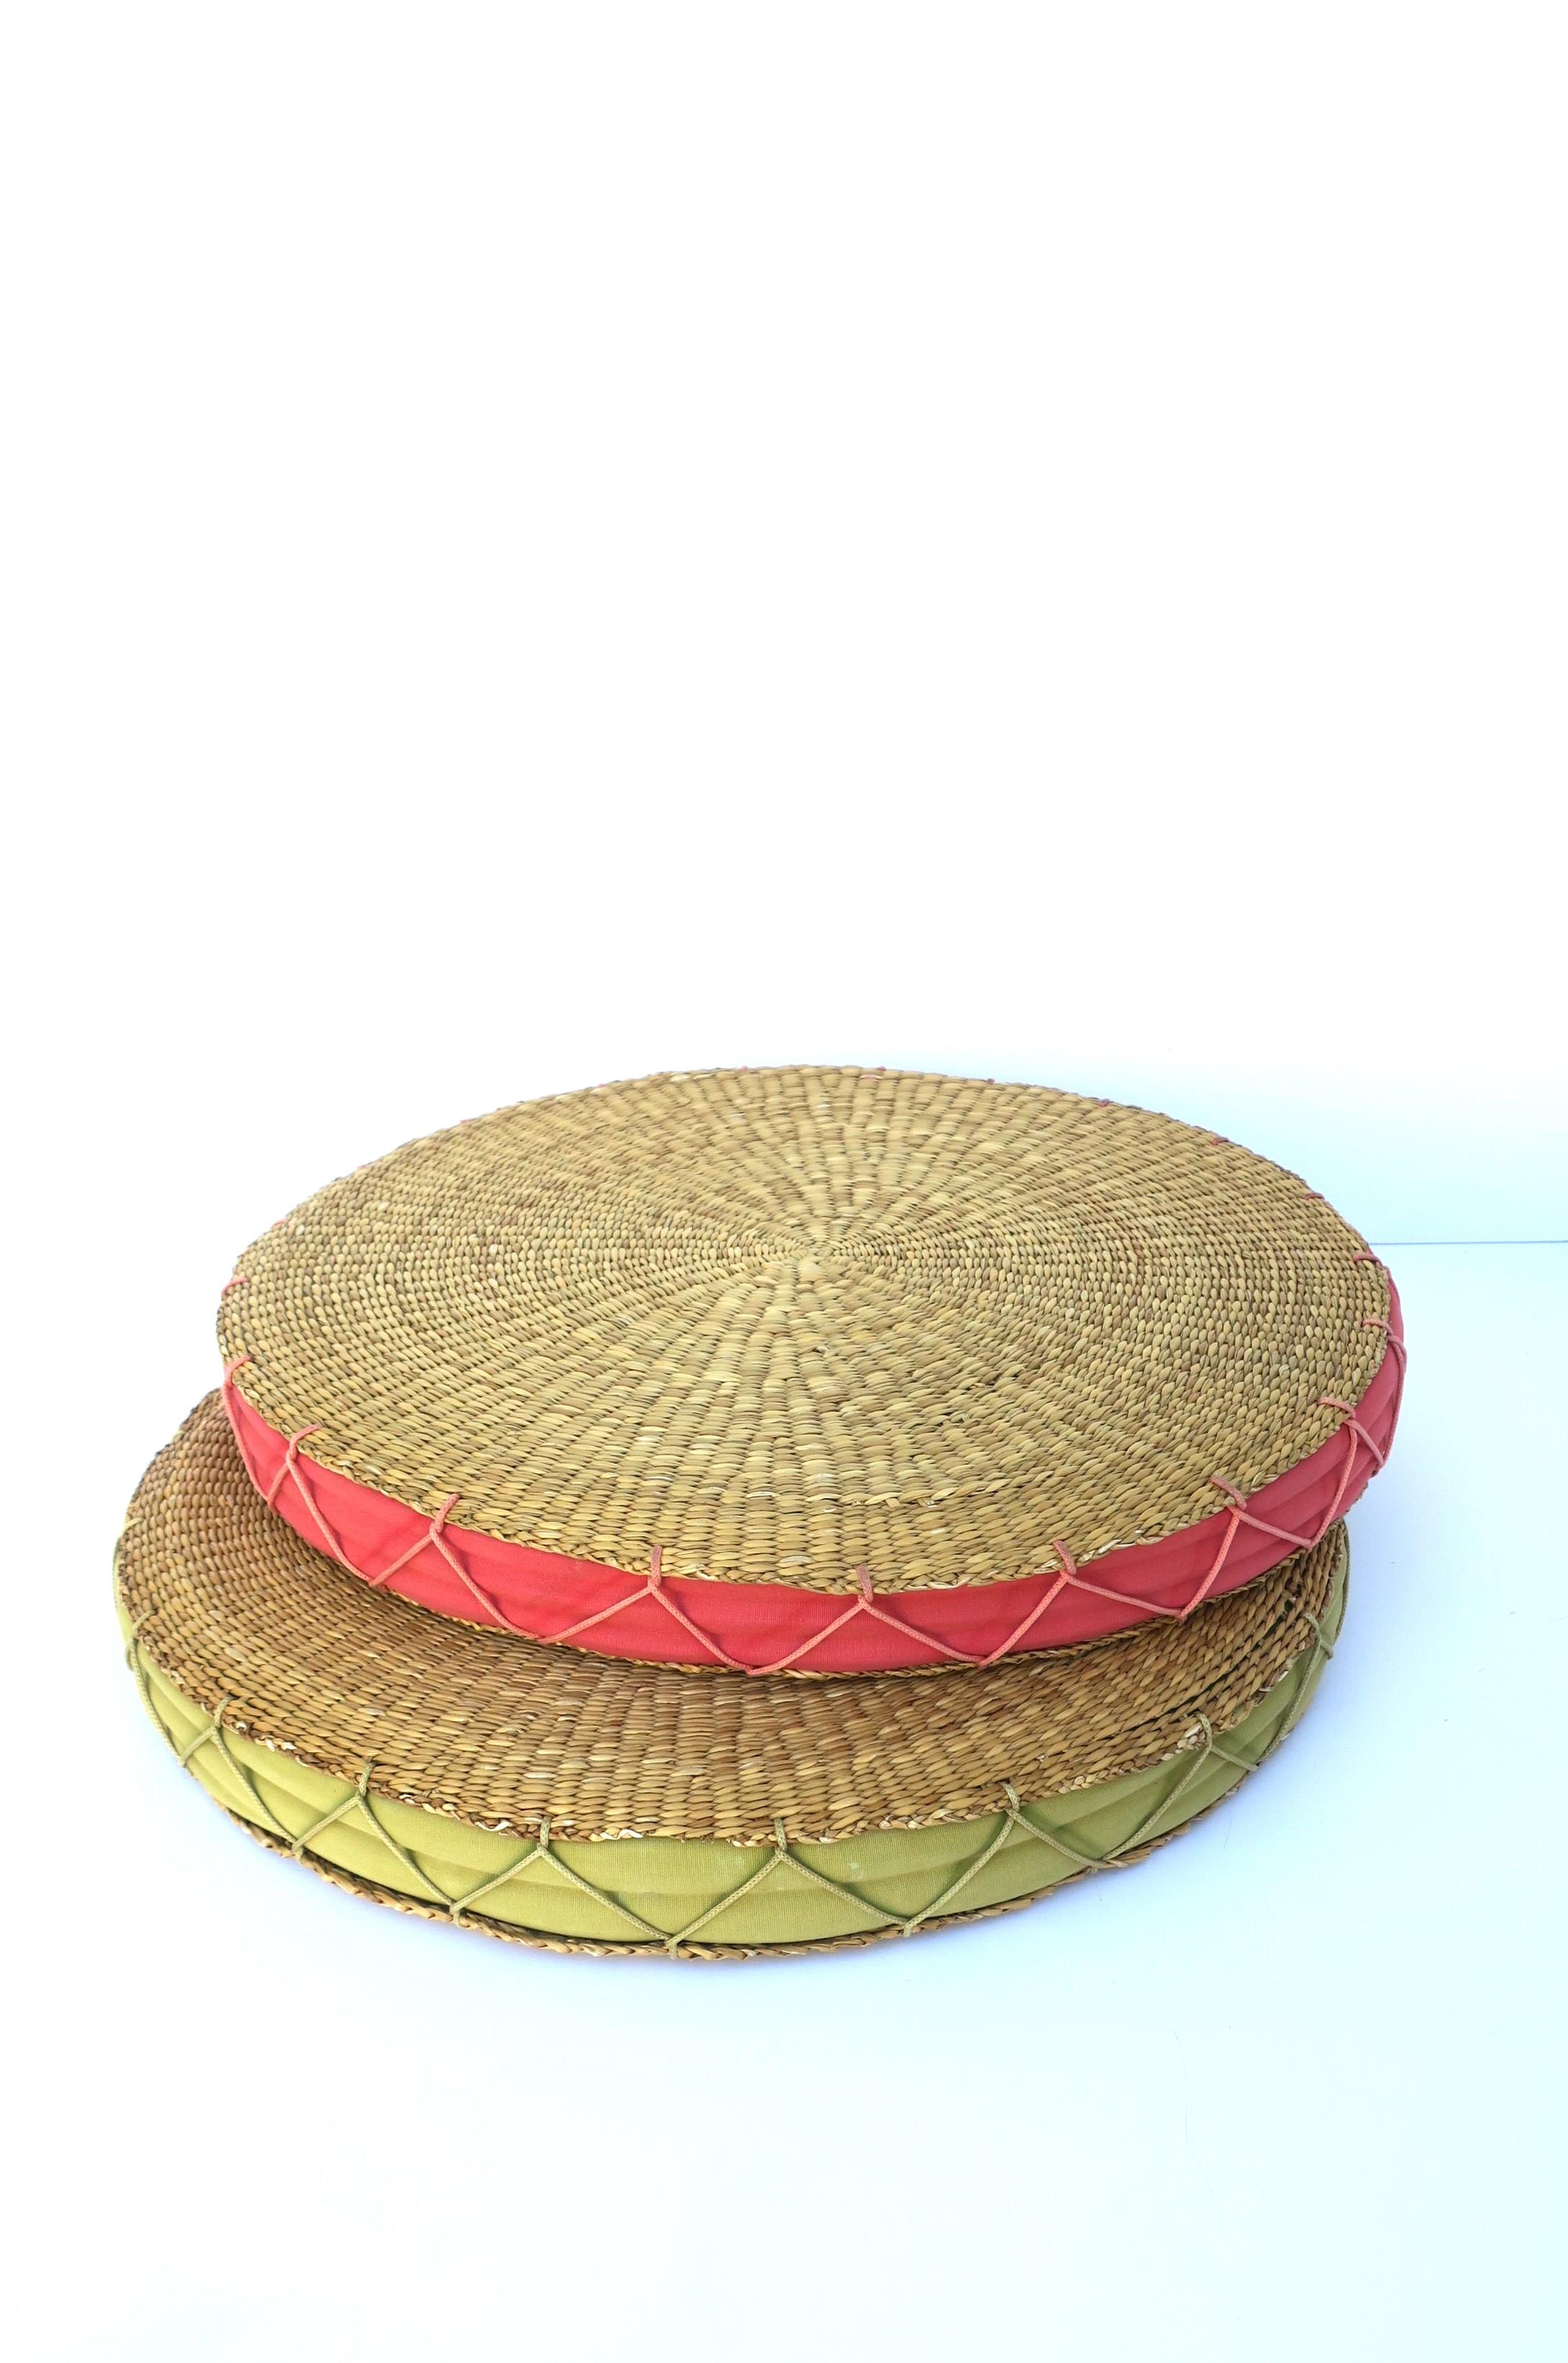 Wicker Seat or Floor Cushion, Green and Tan For Sale 2